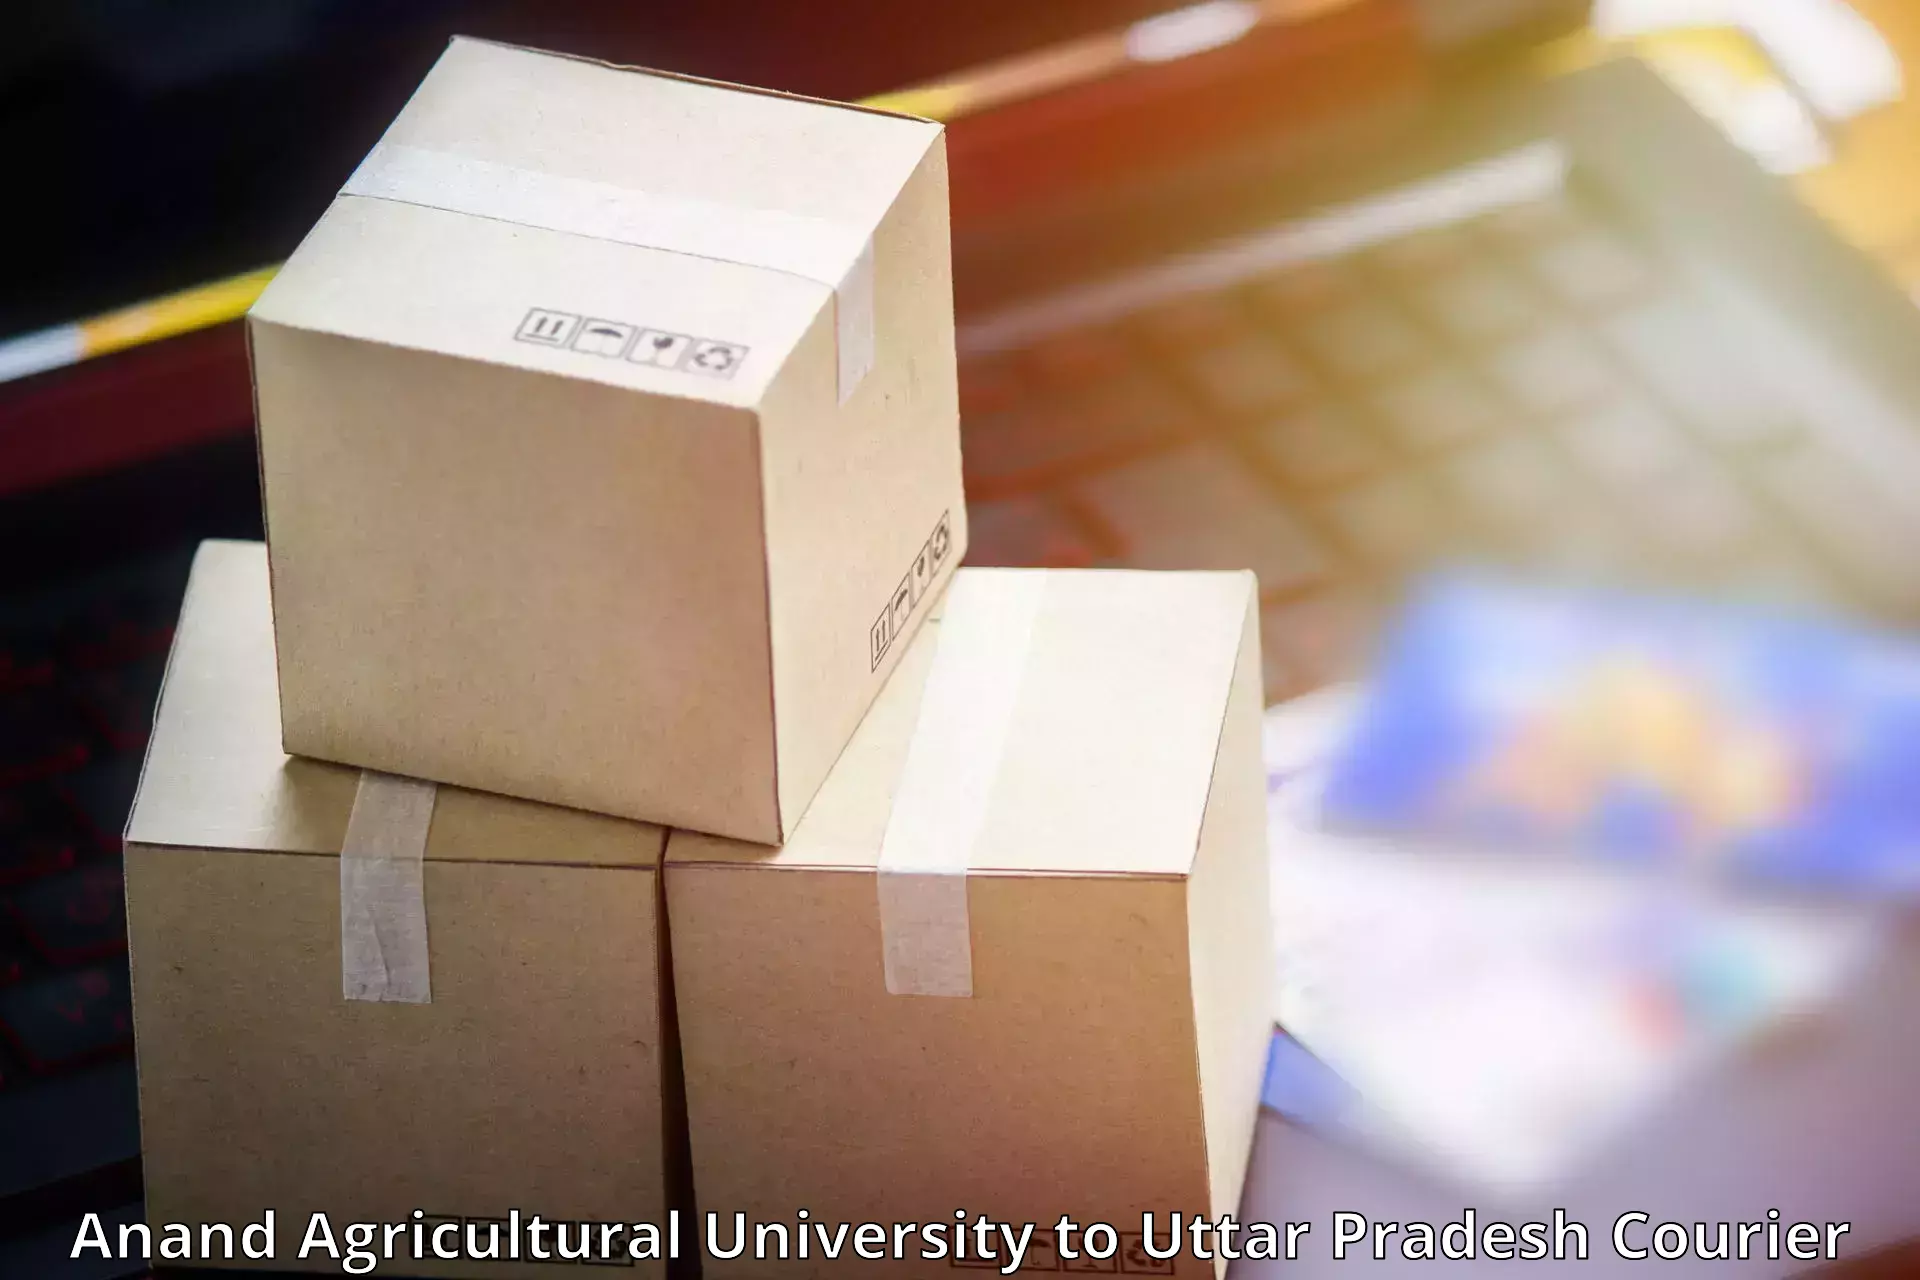 Personal parcel delivery Anand Agricultural University to Atrauli